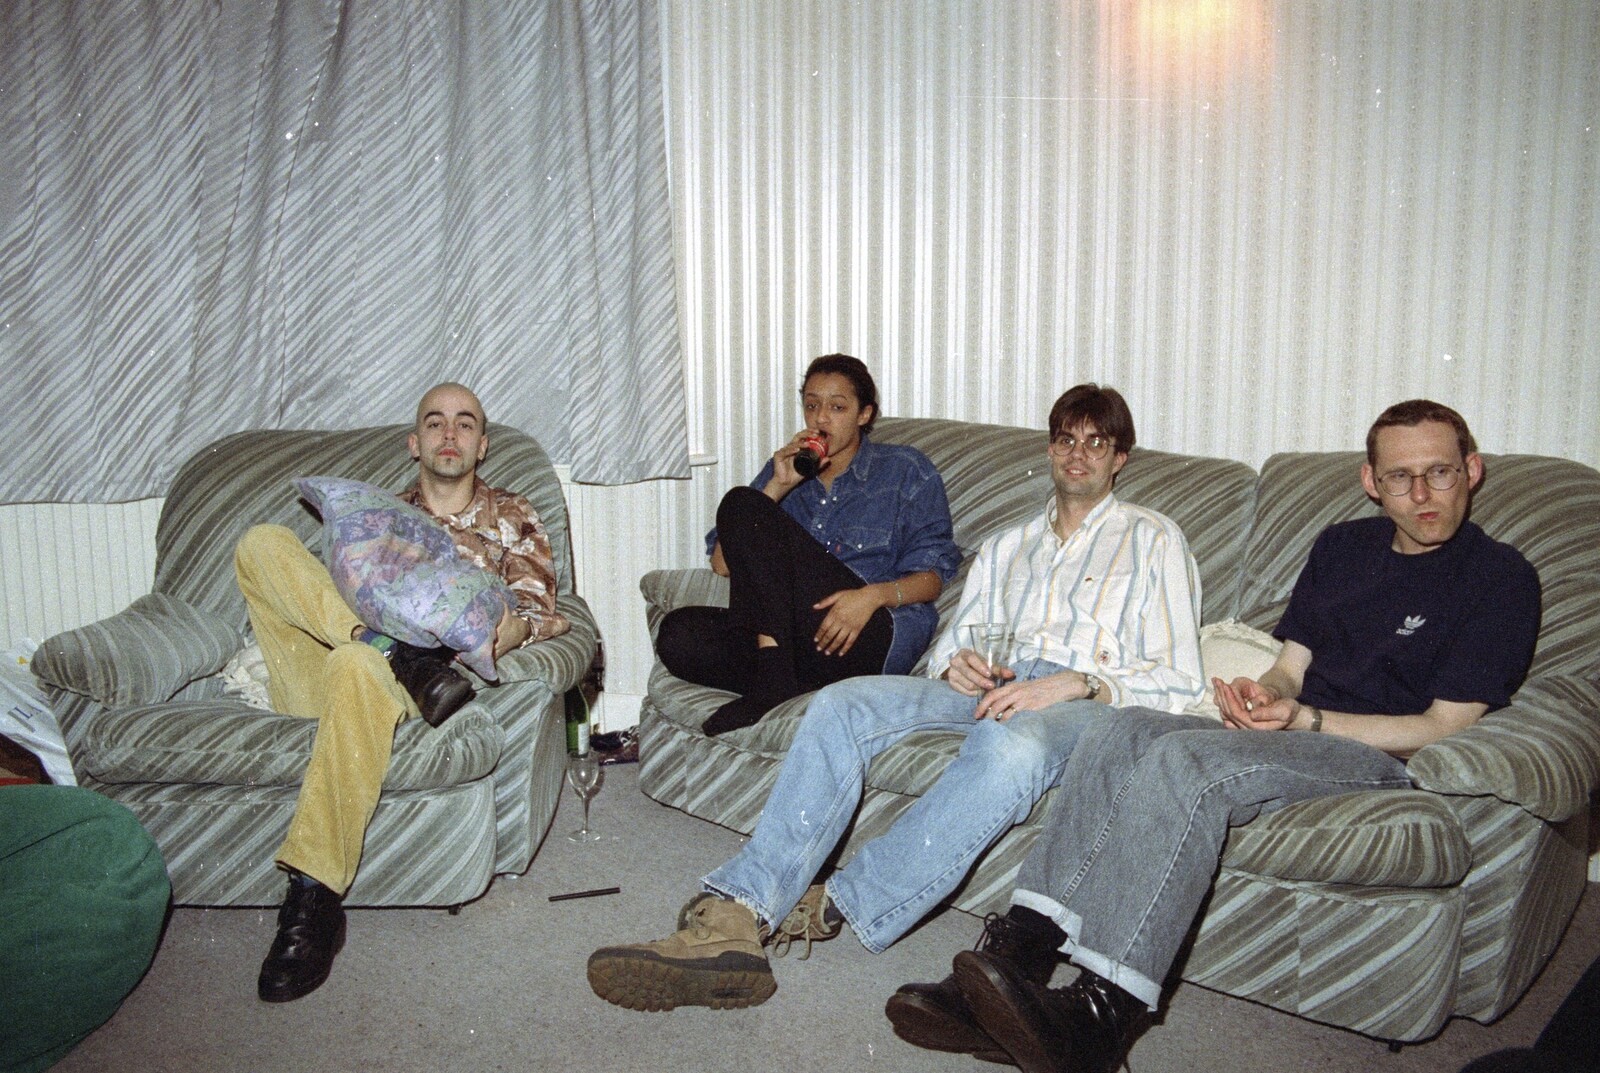 Hanging out in Andrew's lounge from Dougie's Birthday and Adrian Leaves CISU, Ipswich, Suffolk - 29th June 1997